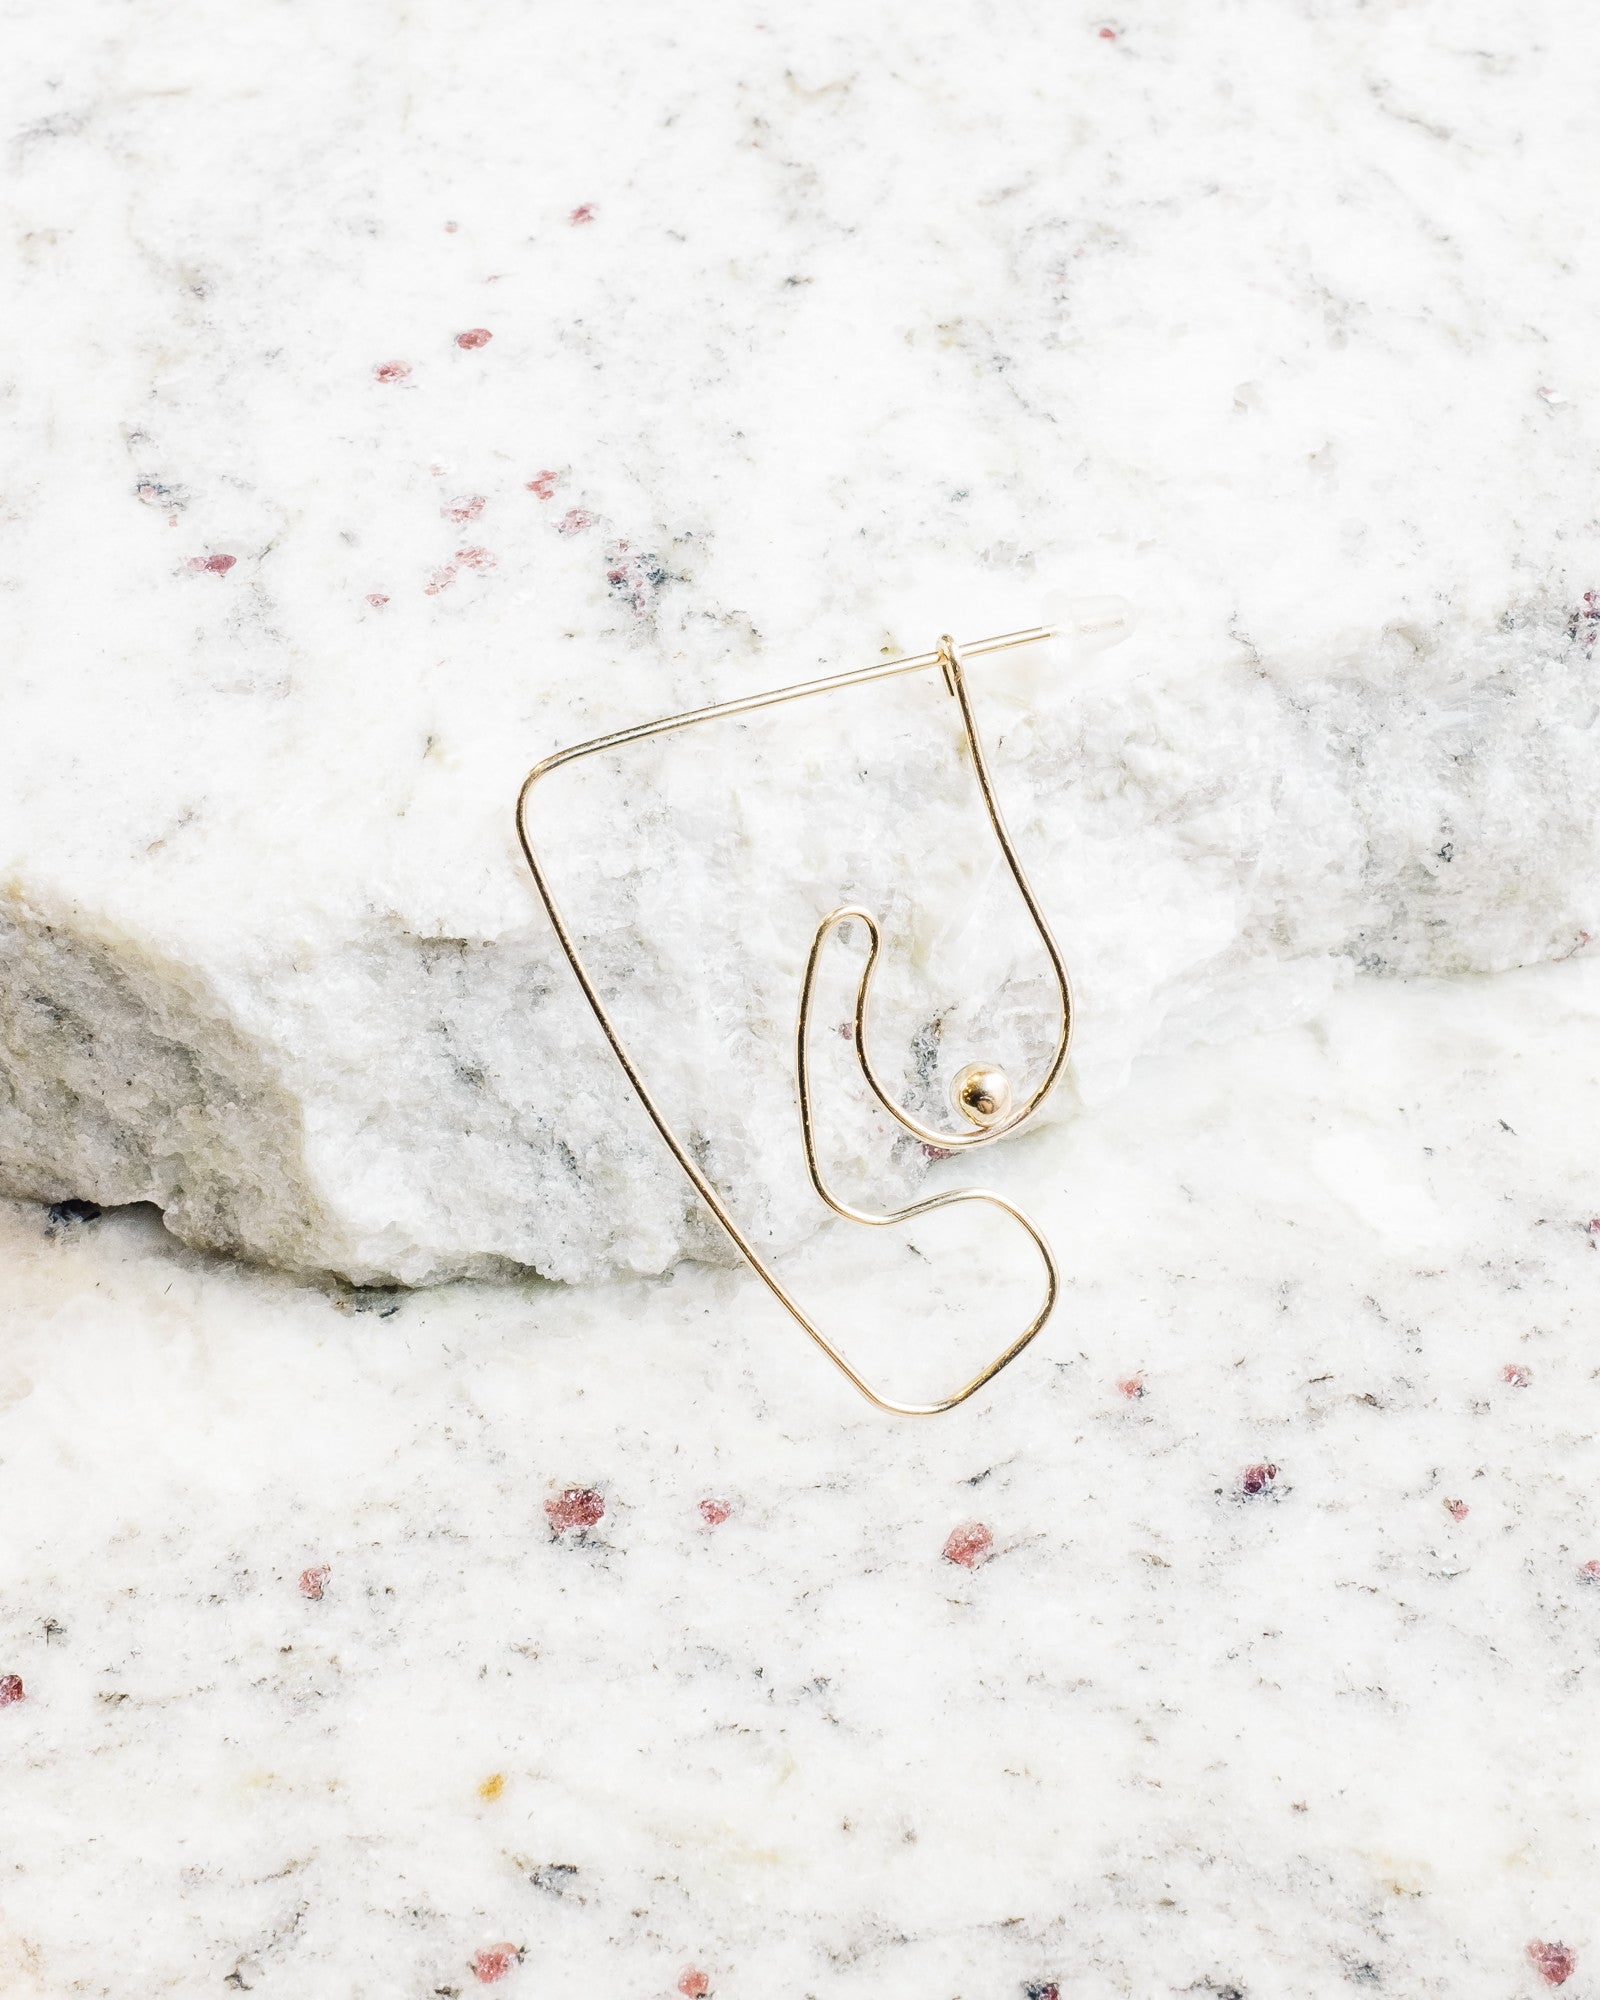 Knobbly Studios Deconstructed Nude Earring